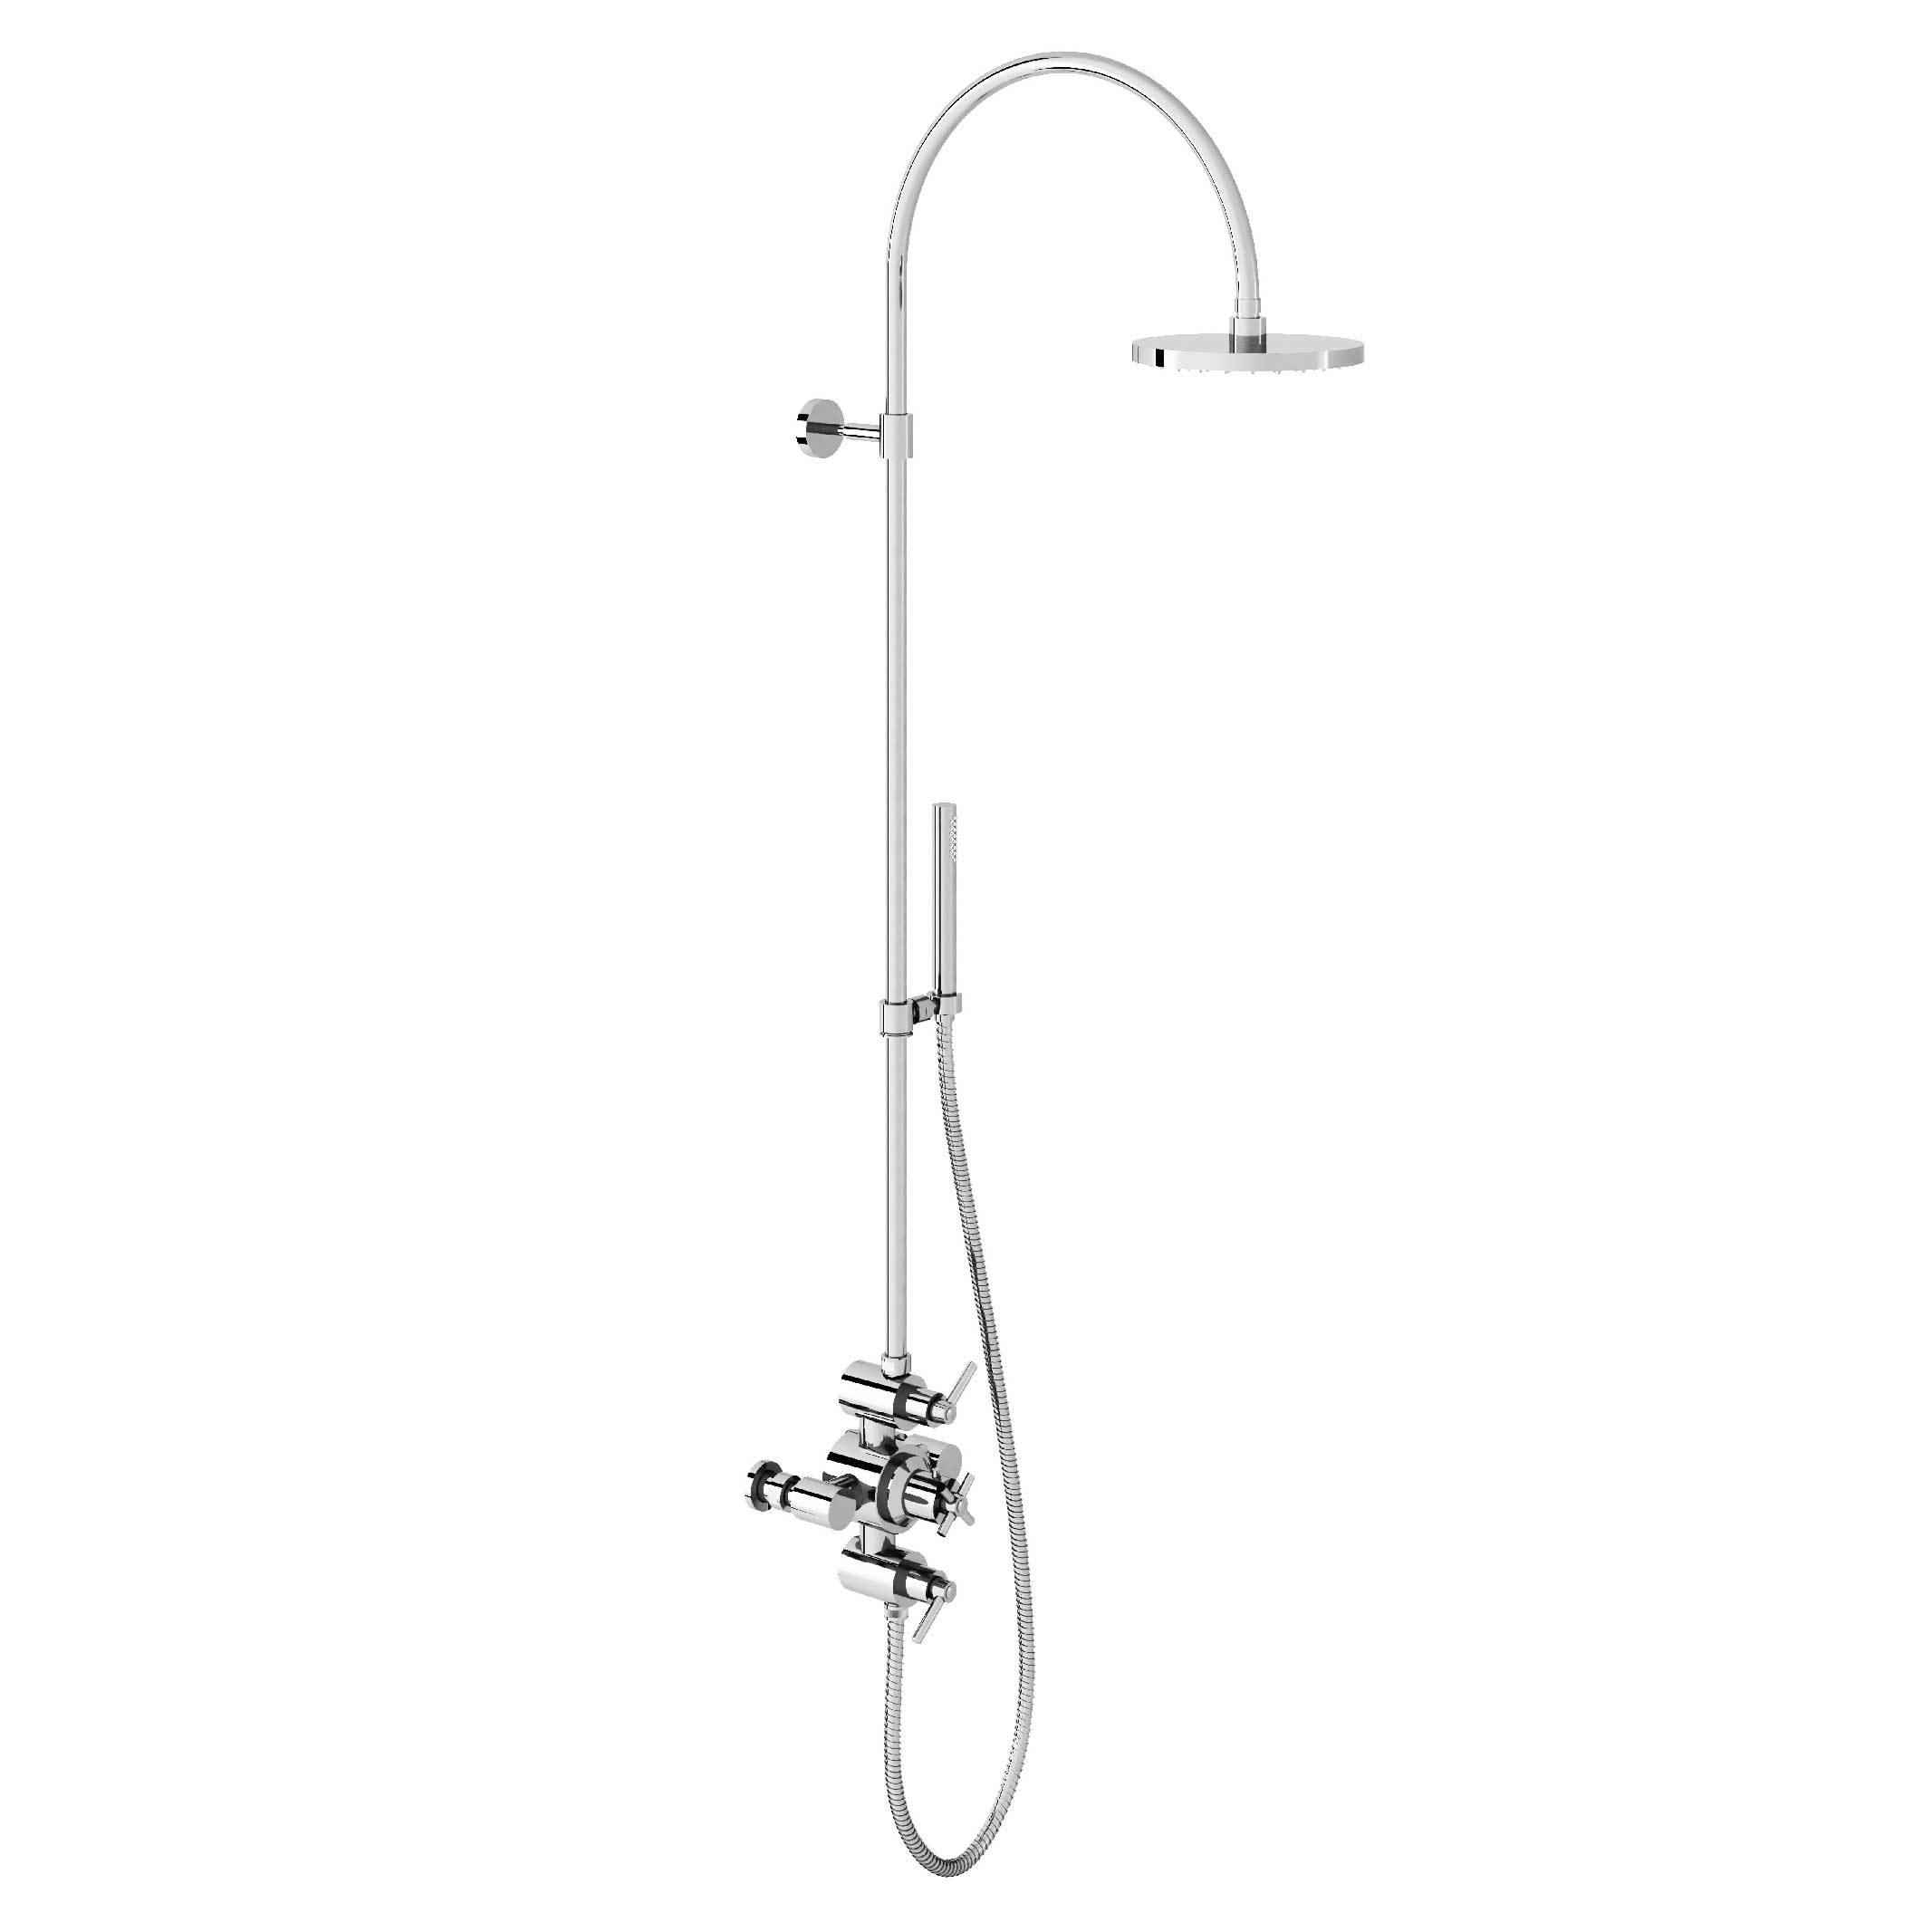 M91-2204T Thermo. shower mixer with column, anti-scaling